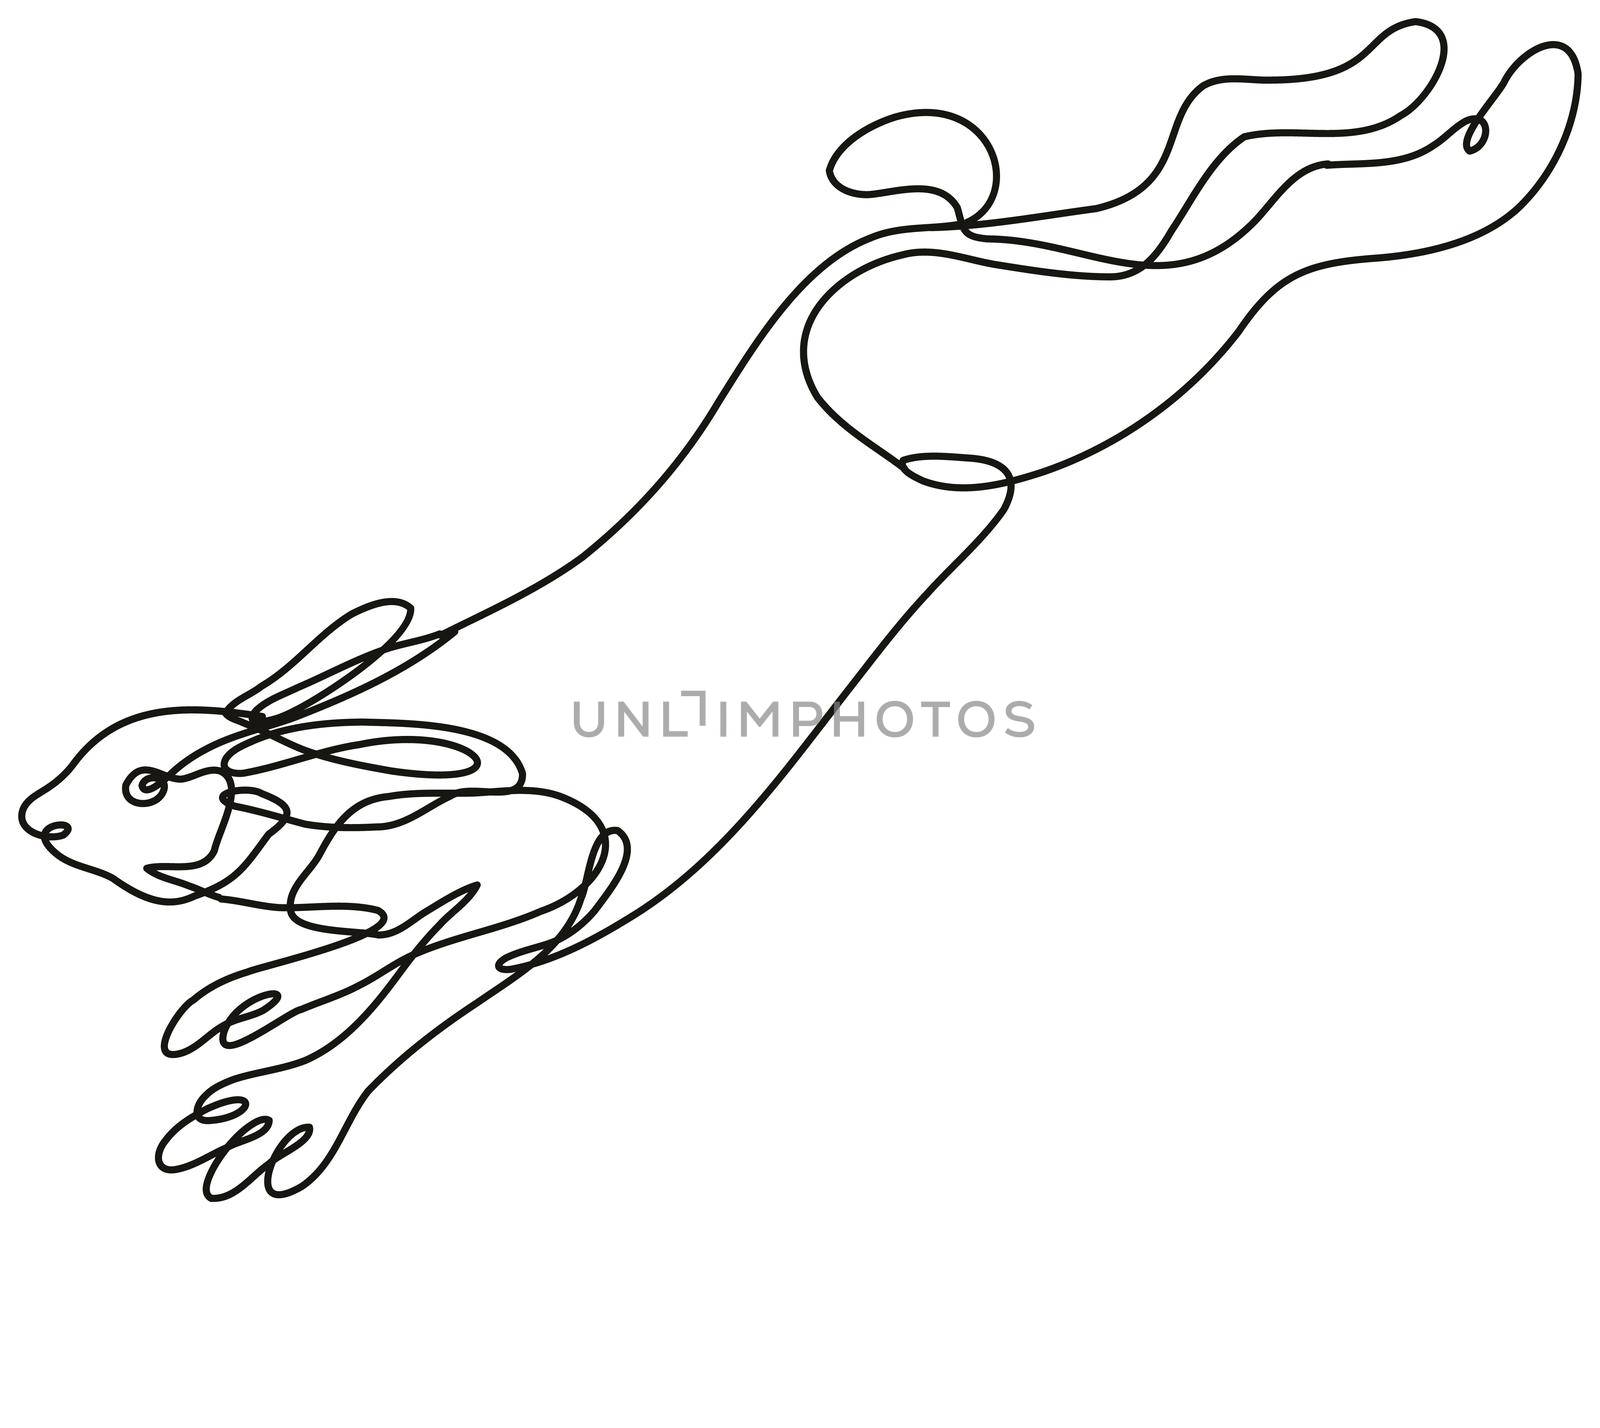 Continuous line drawing illustration of a snowshoe hare, varying hare or snowshoe rabbit jumping side view done in mono line or doodle style in black and white on isolated background. 